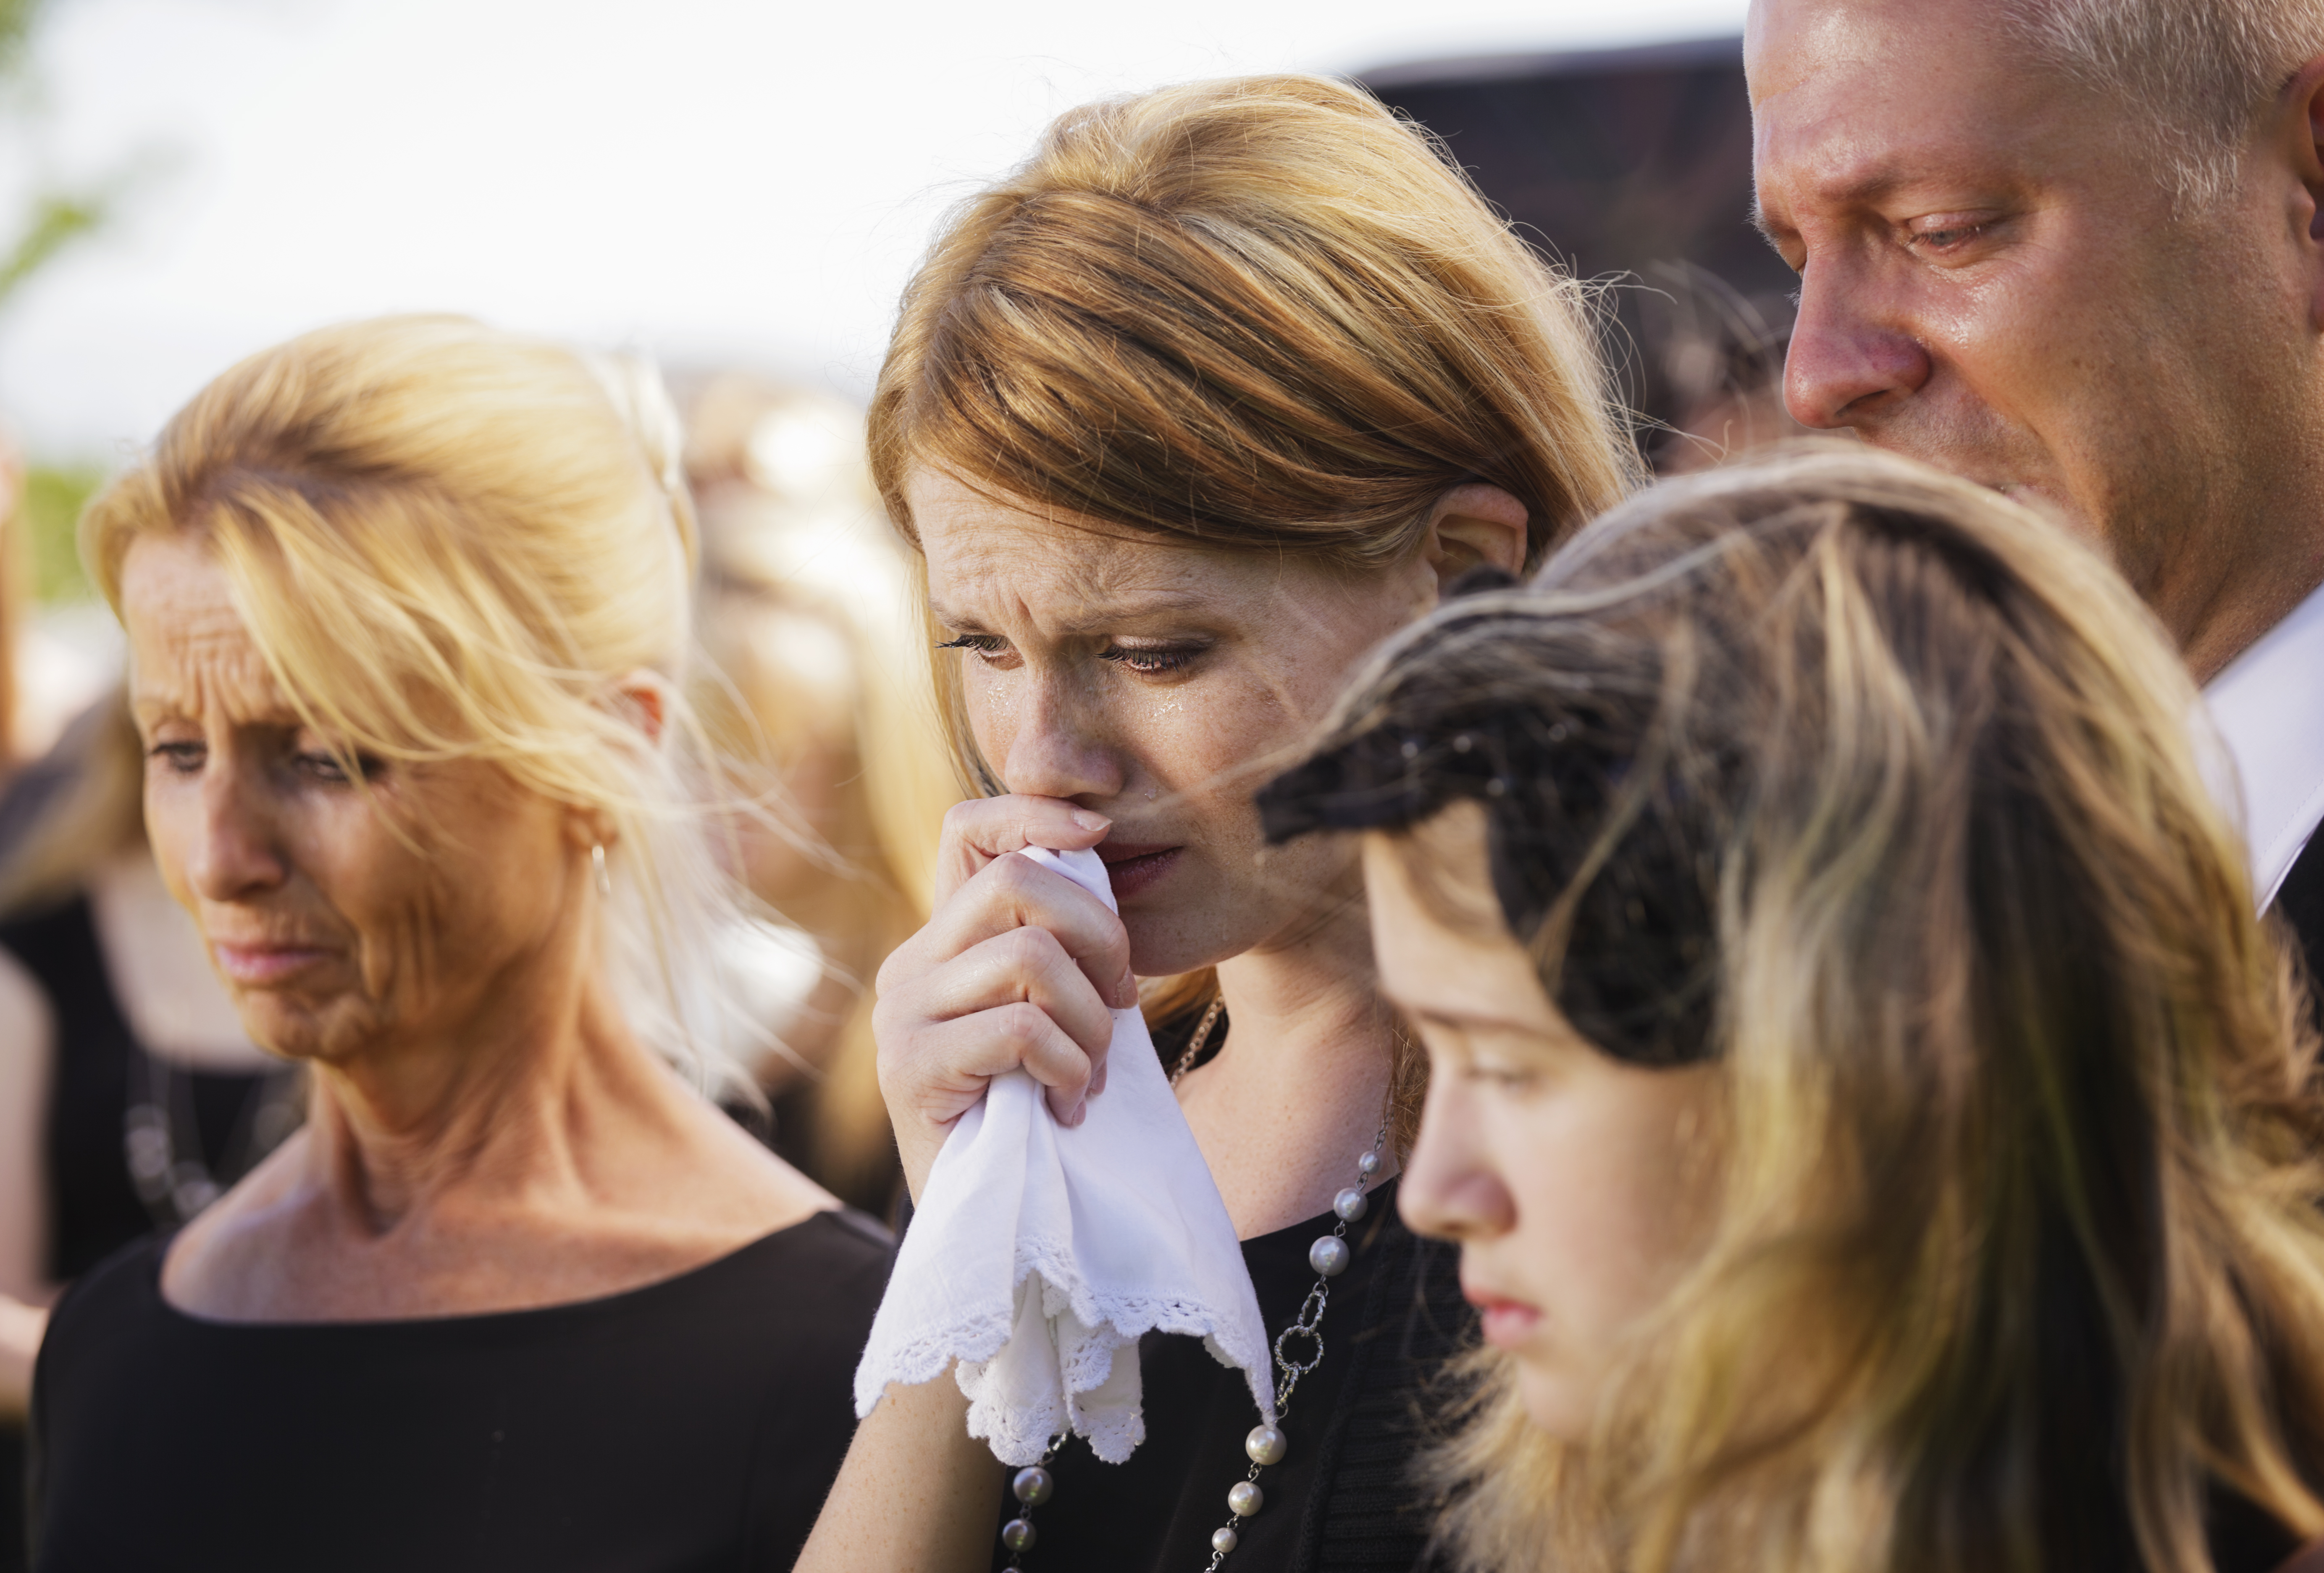 Family at a Funeral | Source: Getty Images